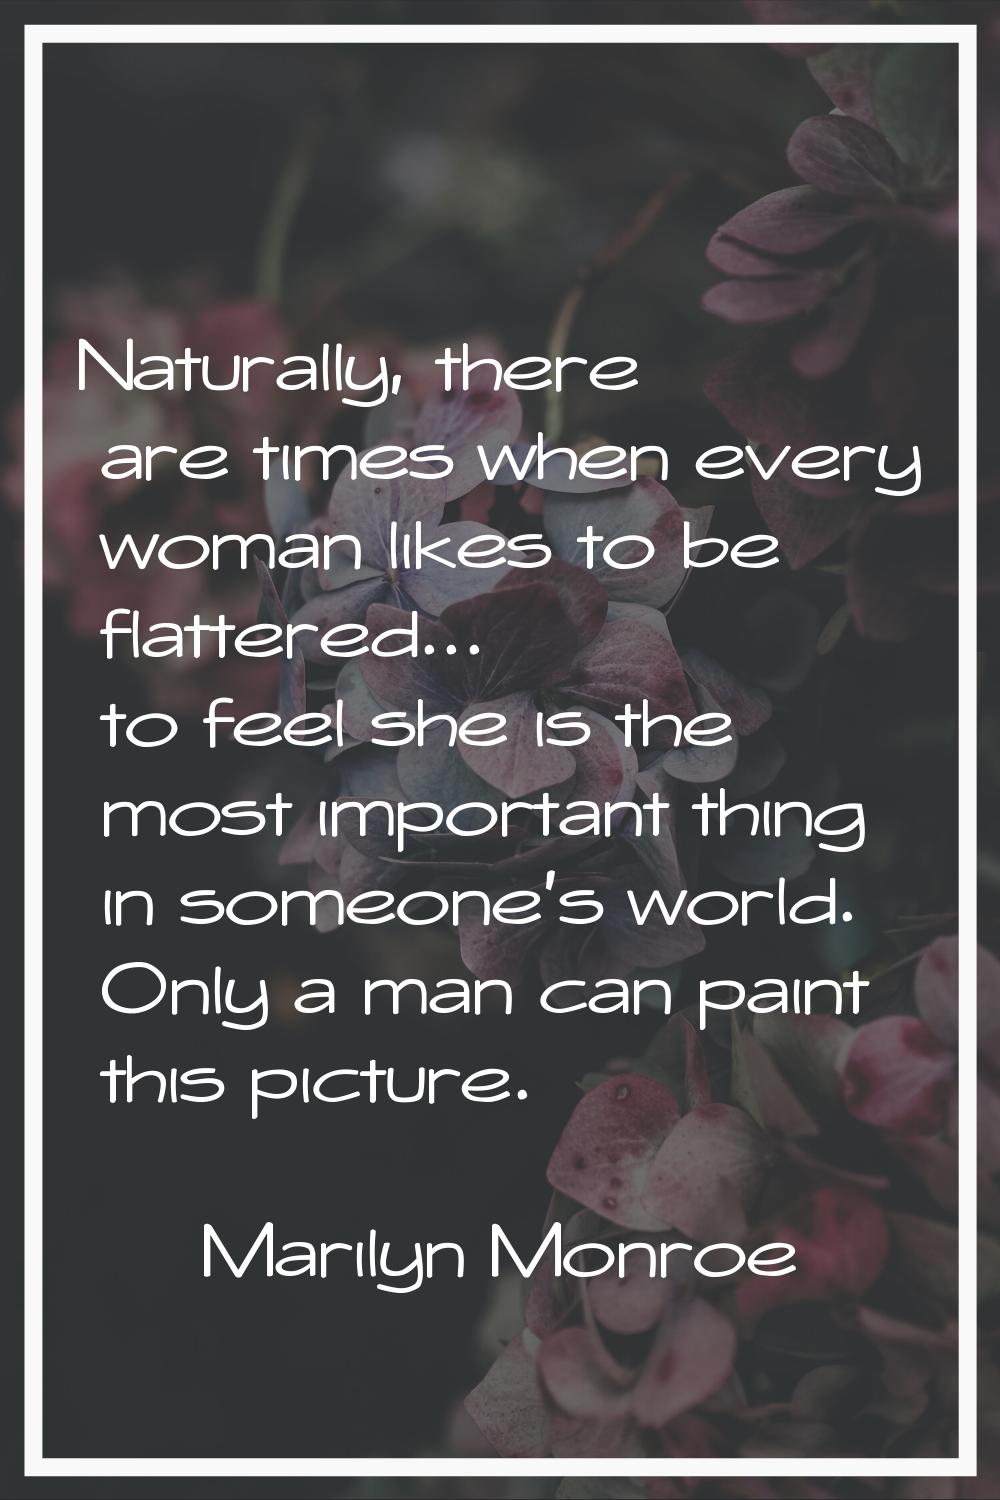 Naturally, there are times when every woman likes to be flattered... to feel she is the most import